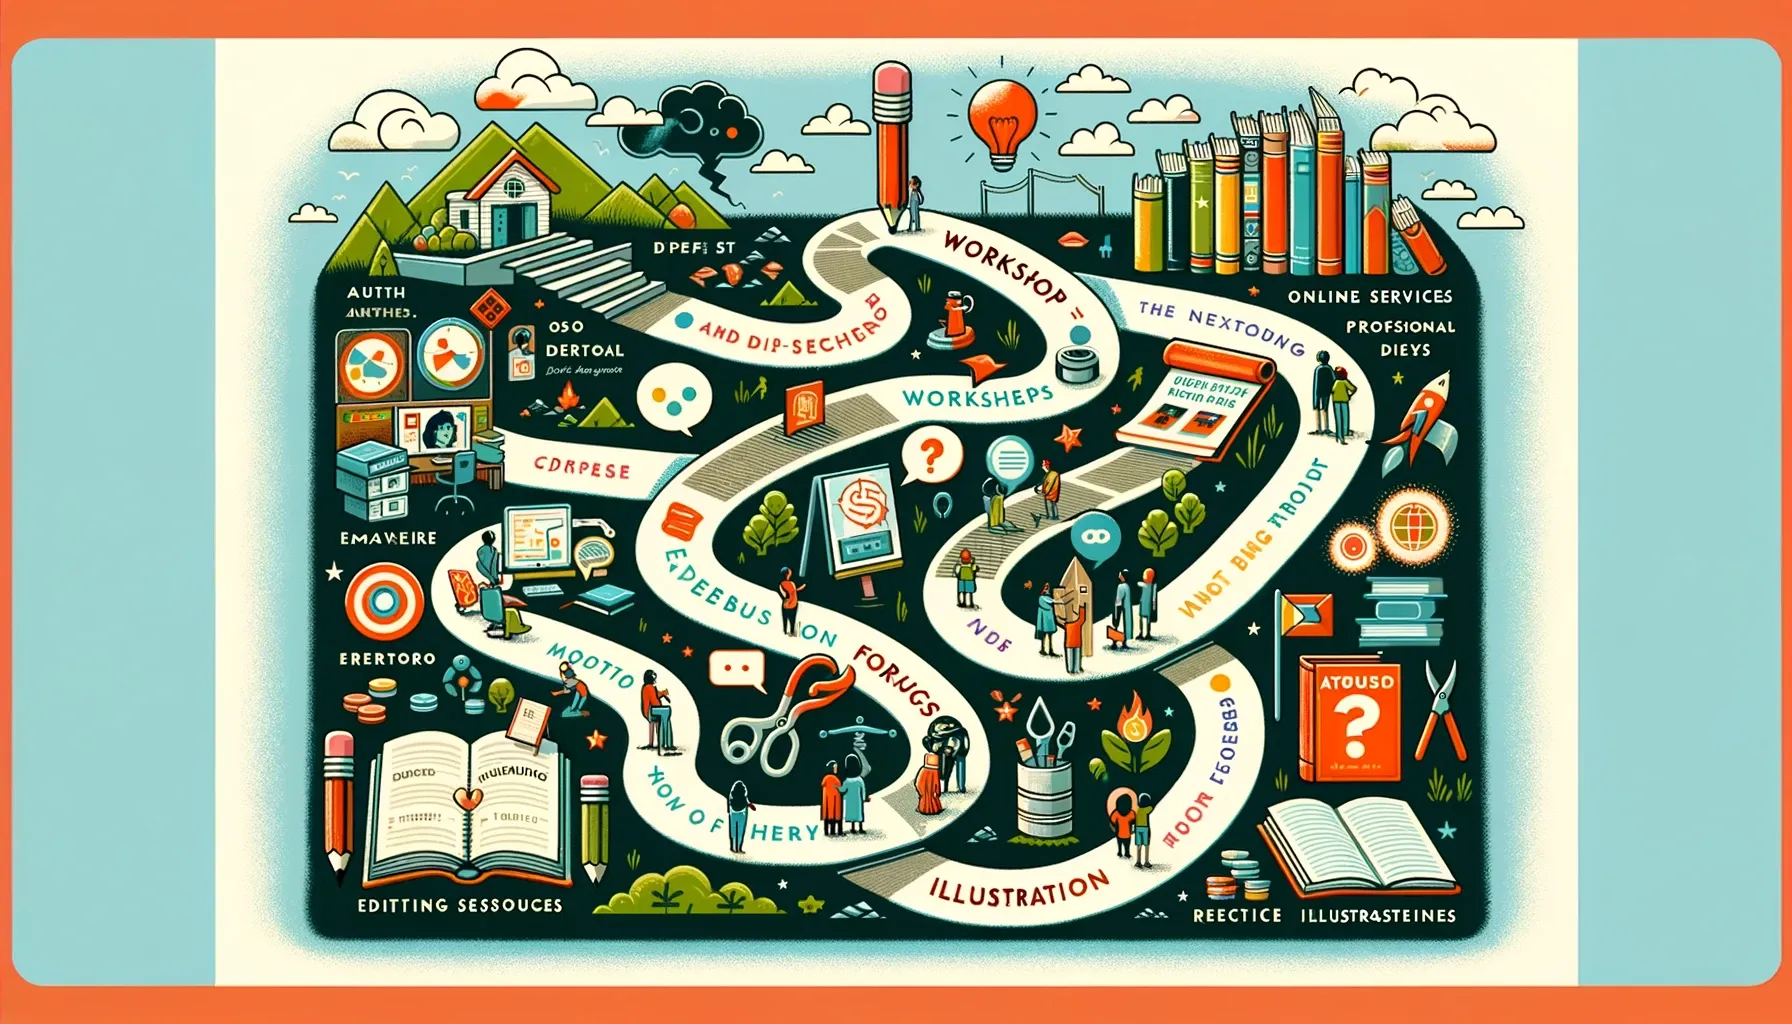 An illustrated map guiding authors through the publishing process, with icons for workshops, forums, and services, showing a colorful path from book idea to publication.